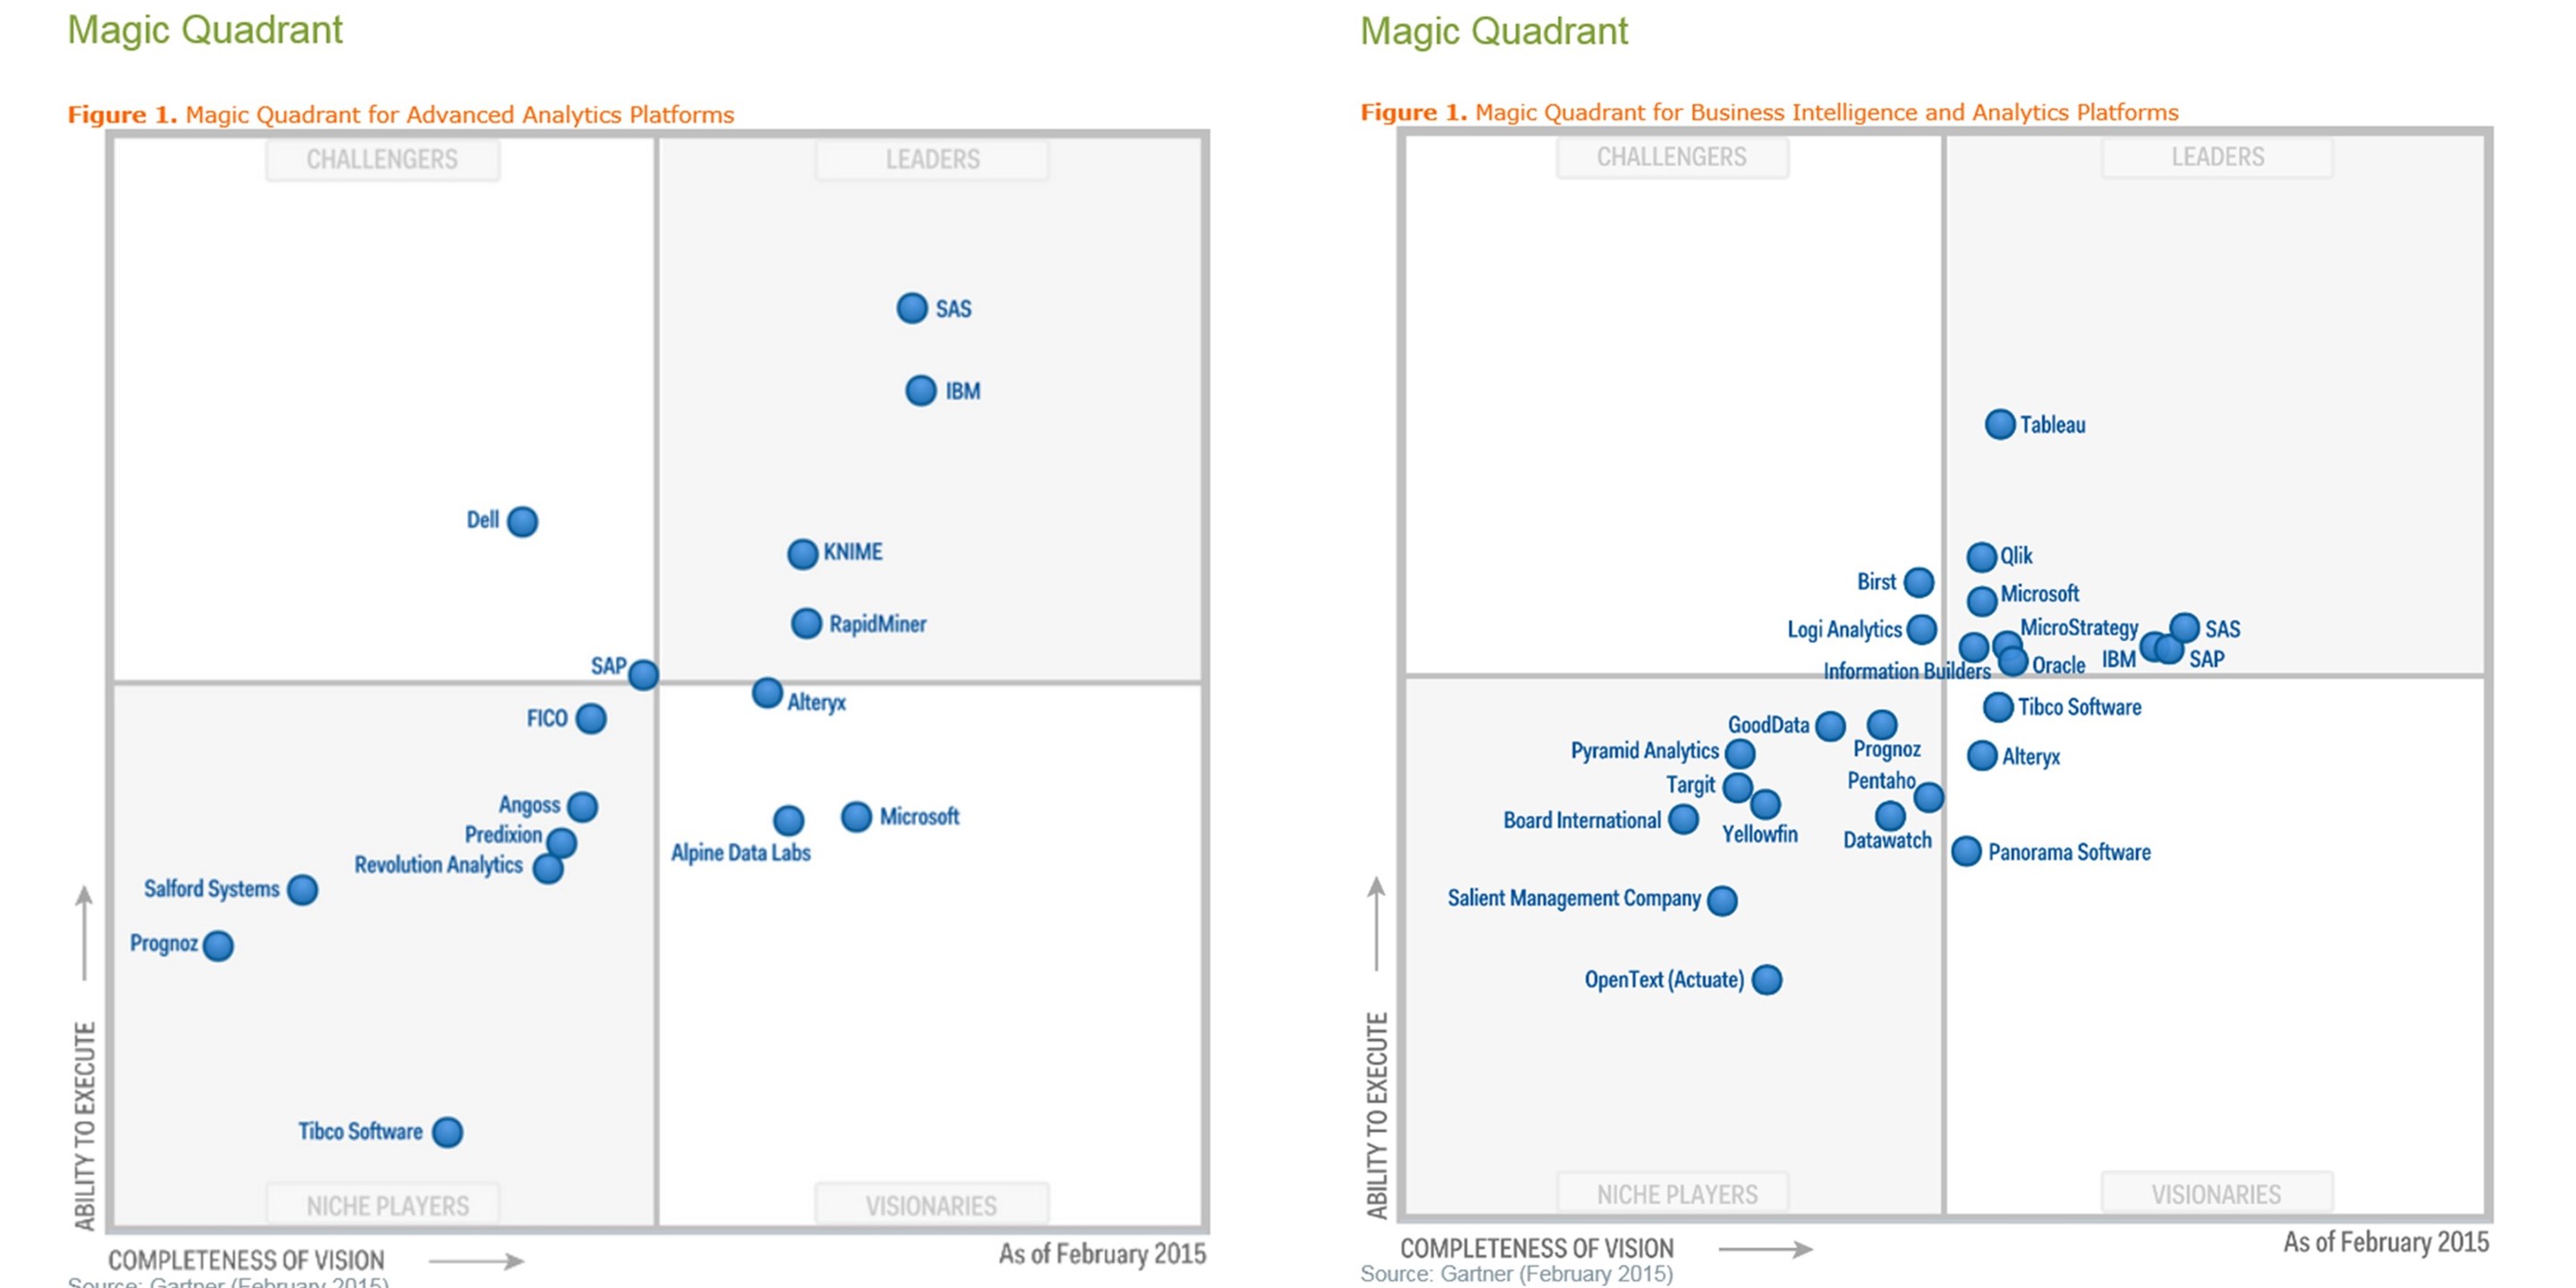 SAS is the leader in the Gartner Magic Quadrant for Advanced Analytics and Business Intelligence.